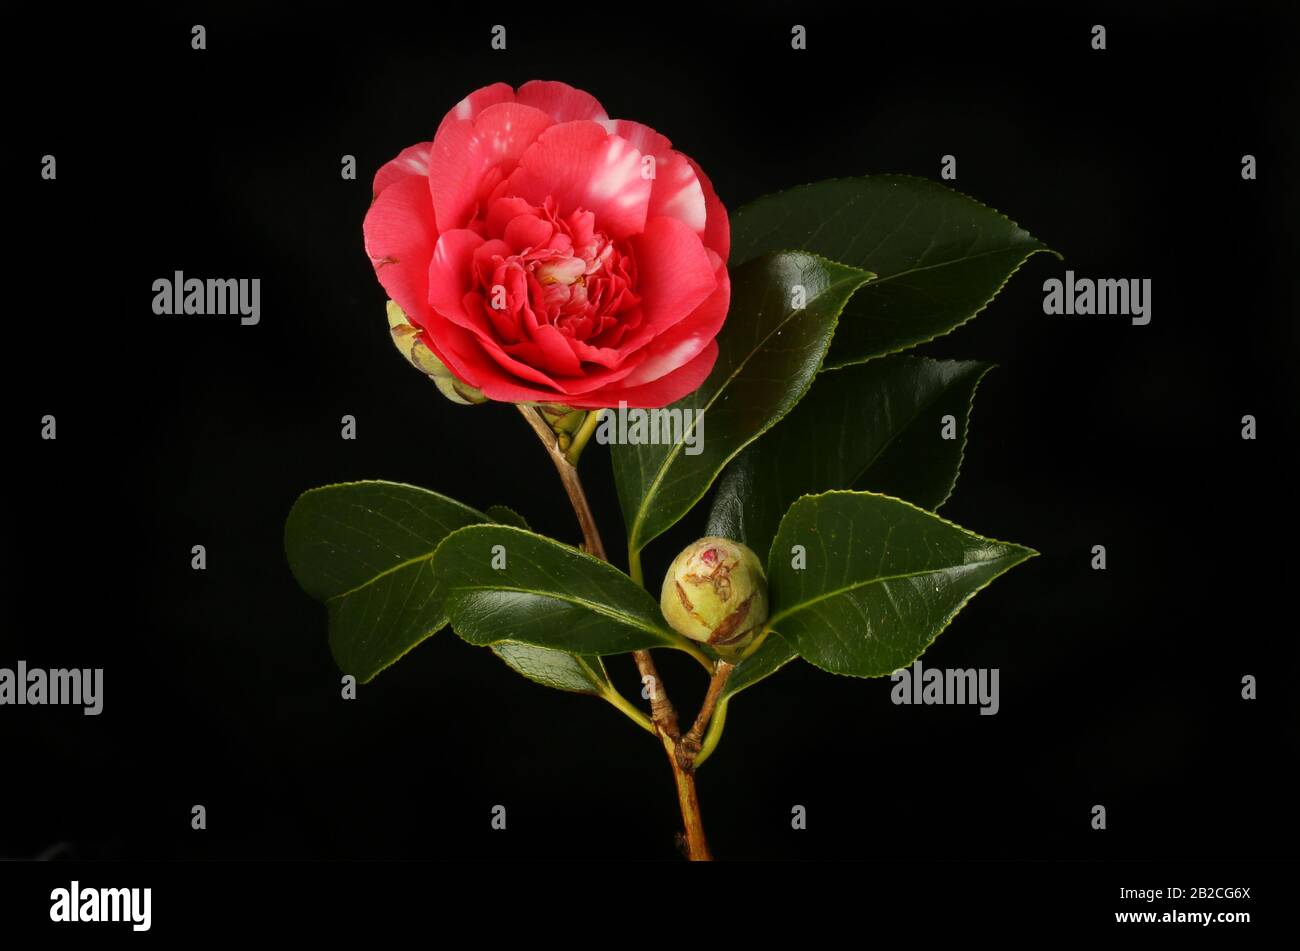 Red and white camellia, flower, foliage and buds isolated against black Stock Photo